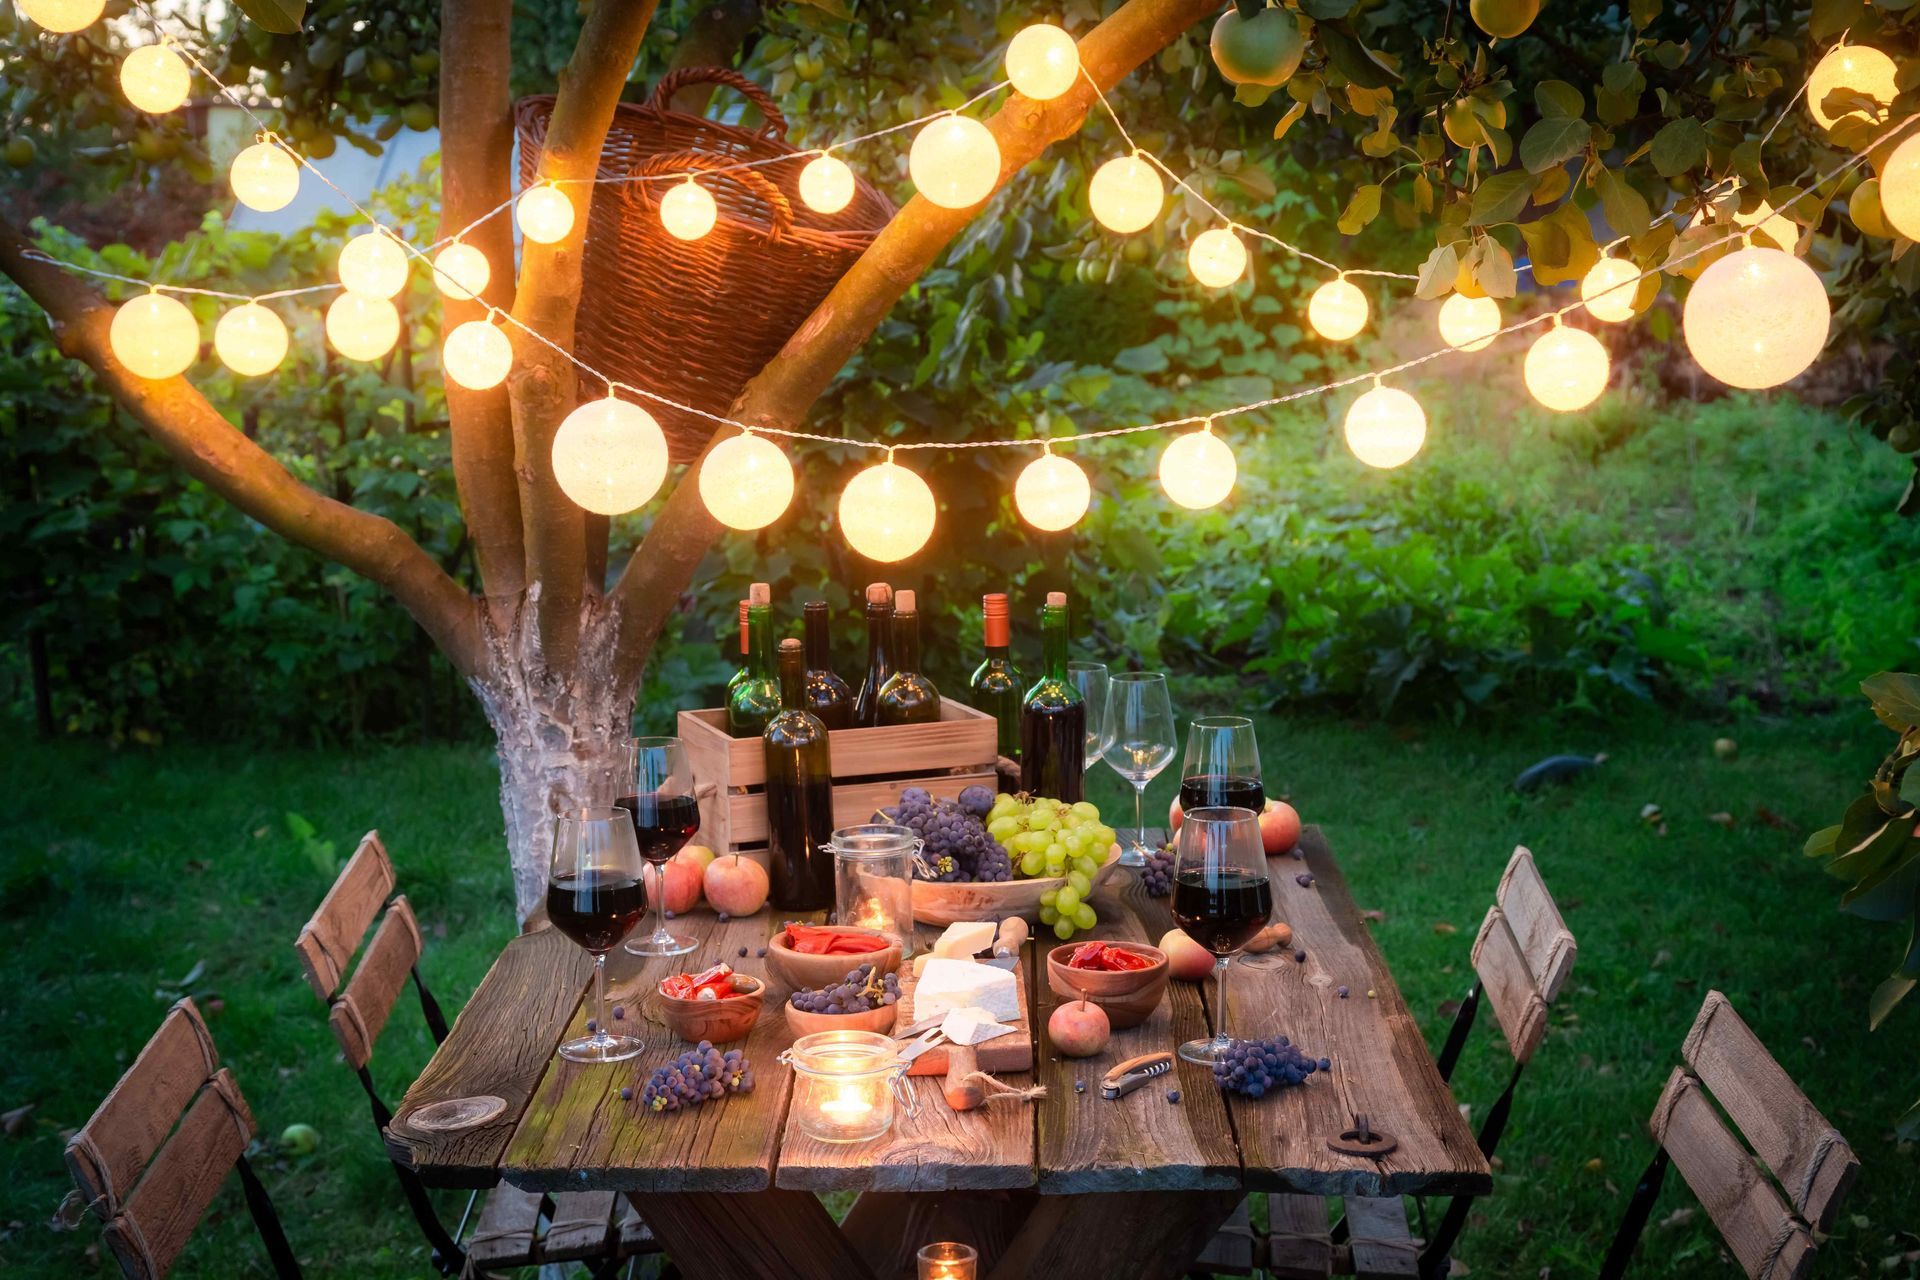 Spherical lights on a string above a picnic table